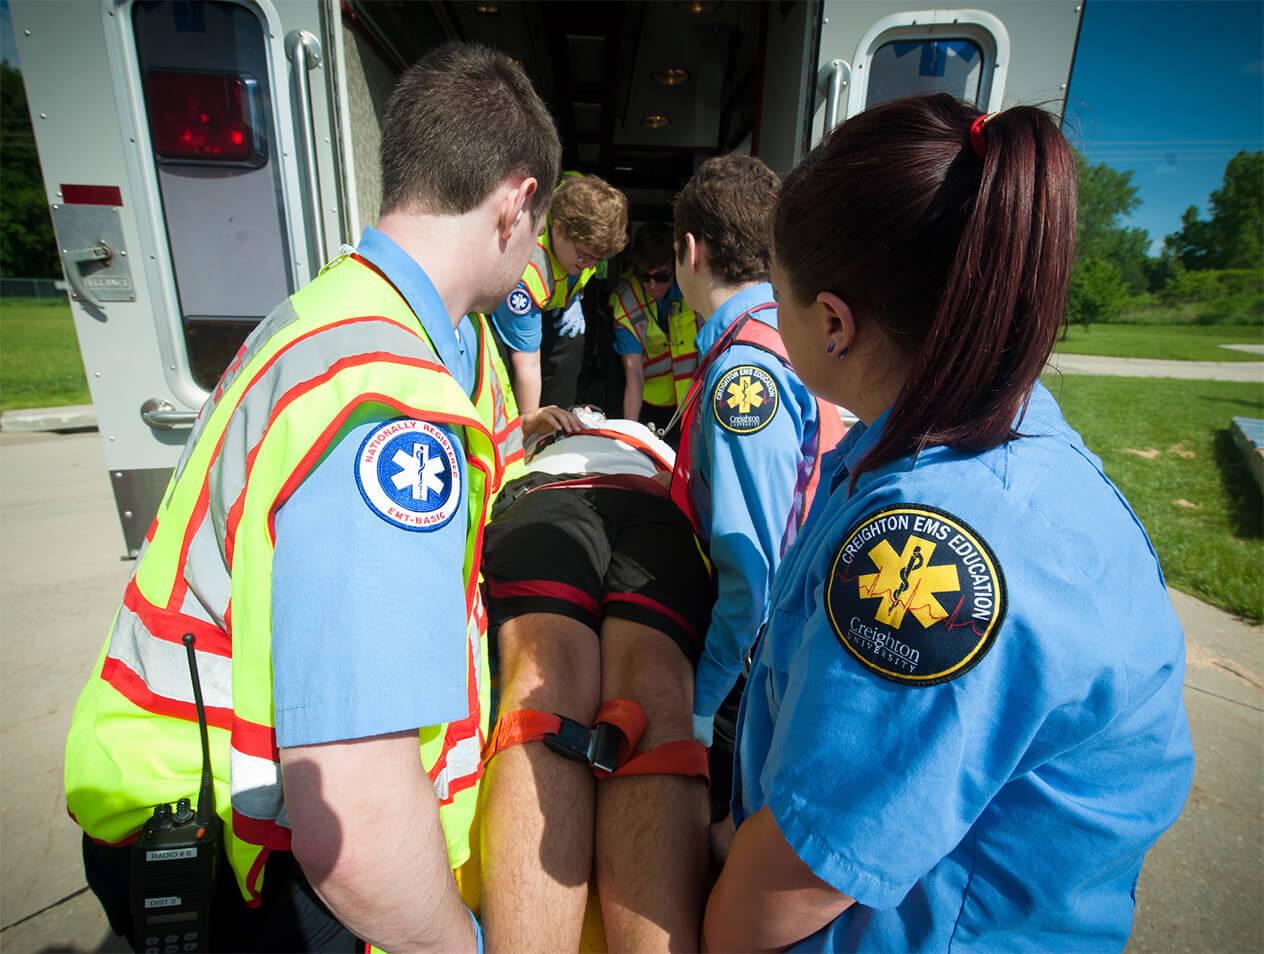 EMS providers loading a patient on a stretcher into an ambulance